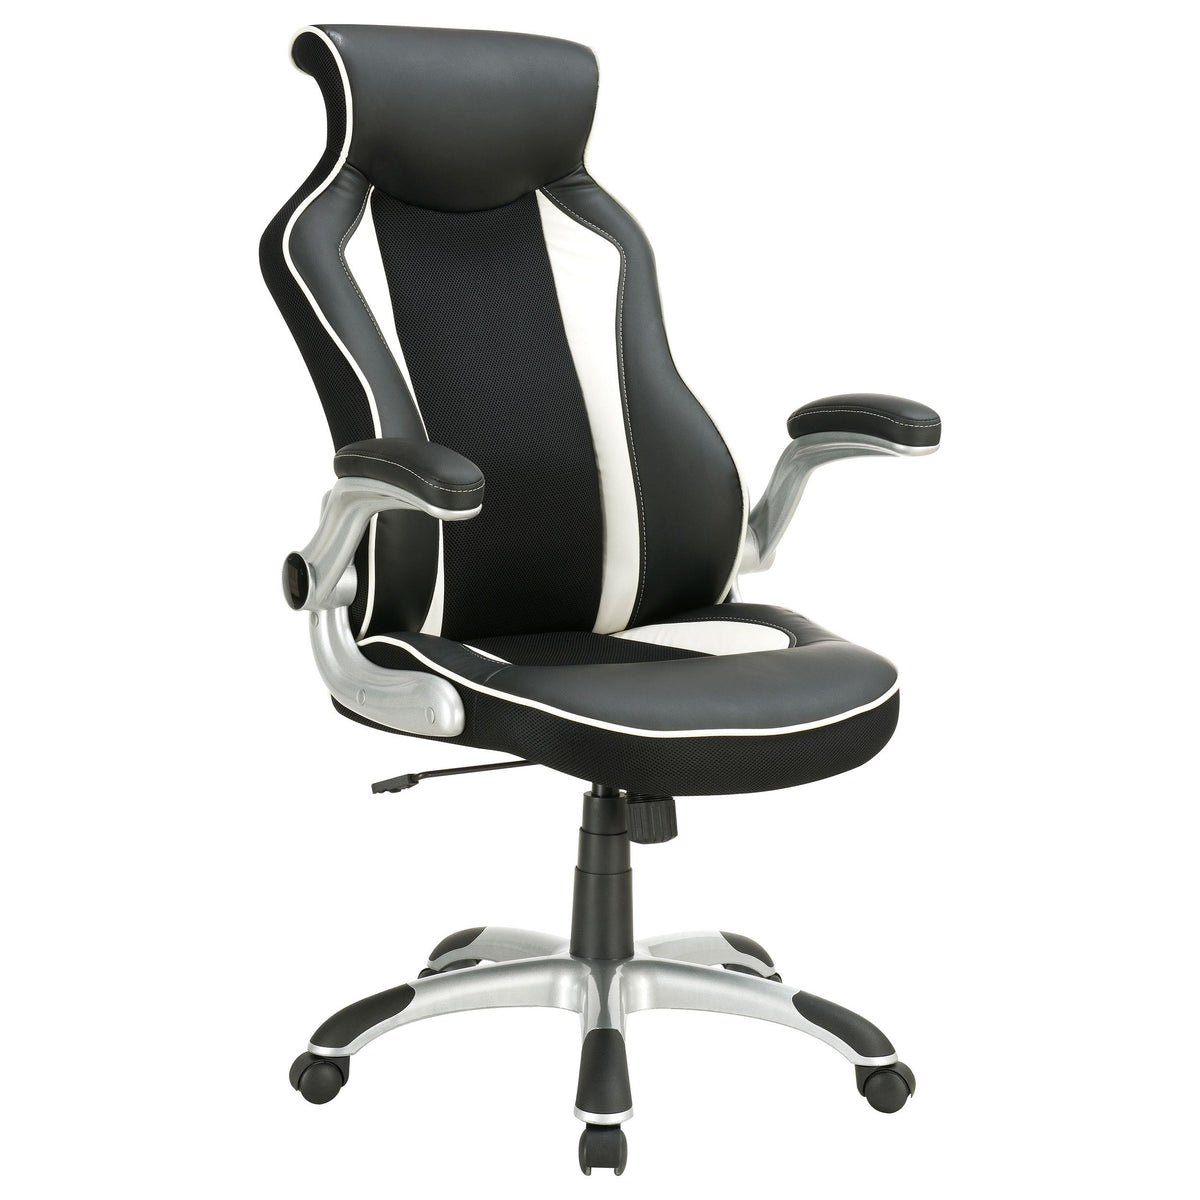 Dustin Adjustable Height Office Chair Black and Silver  Las Vegas Furniture Stores